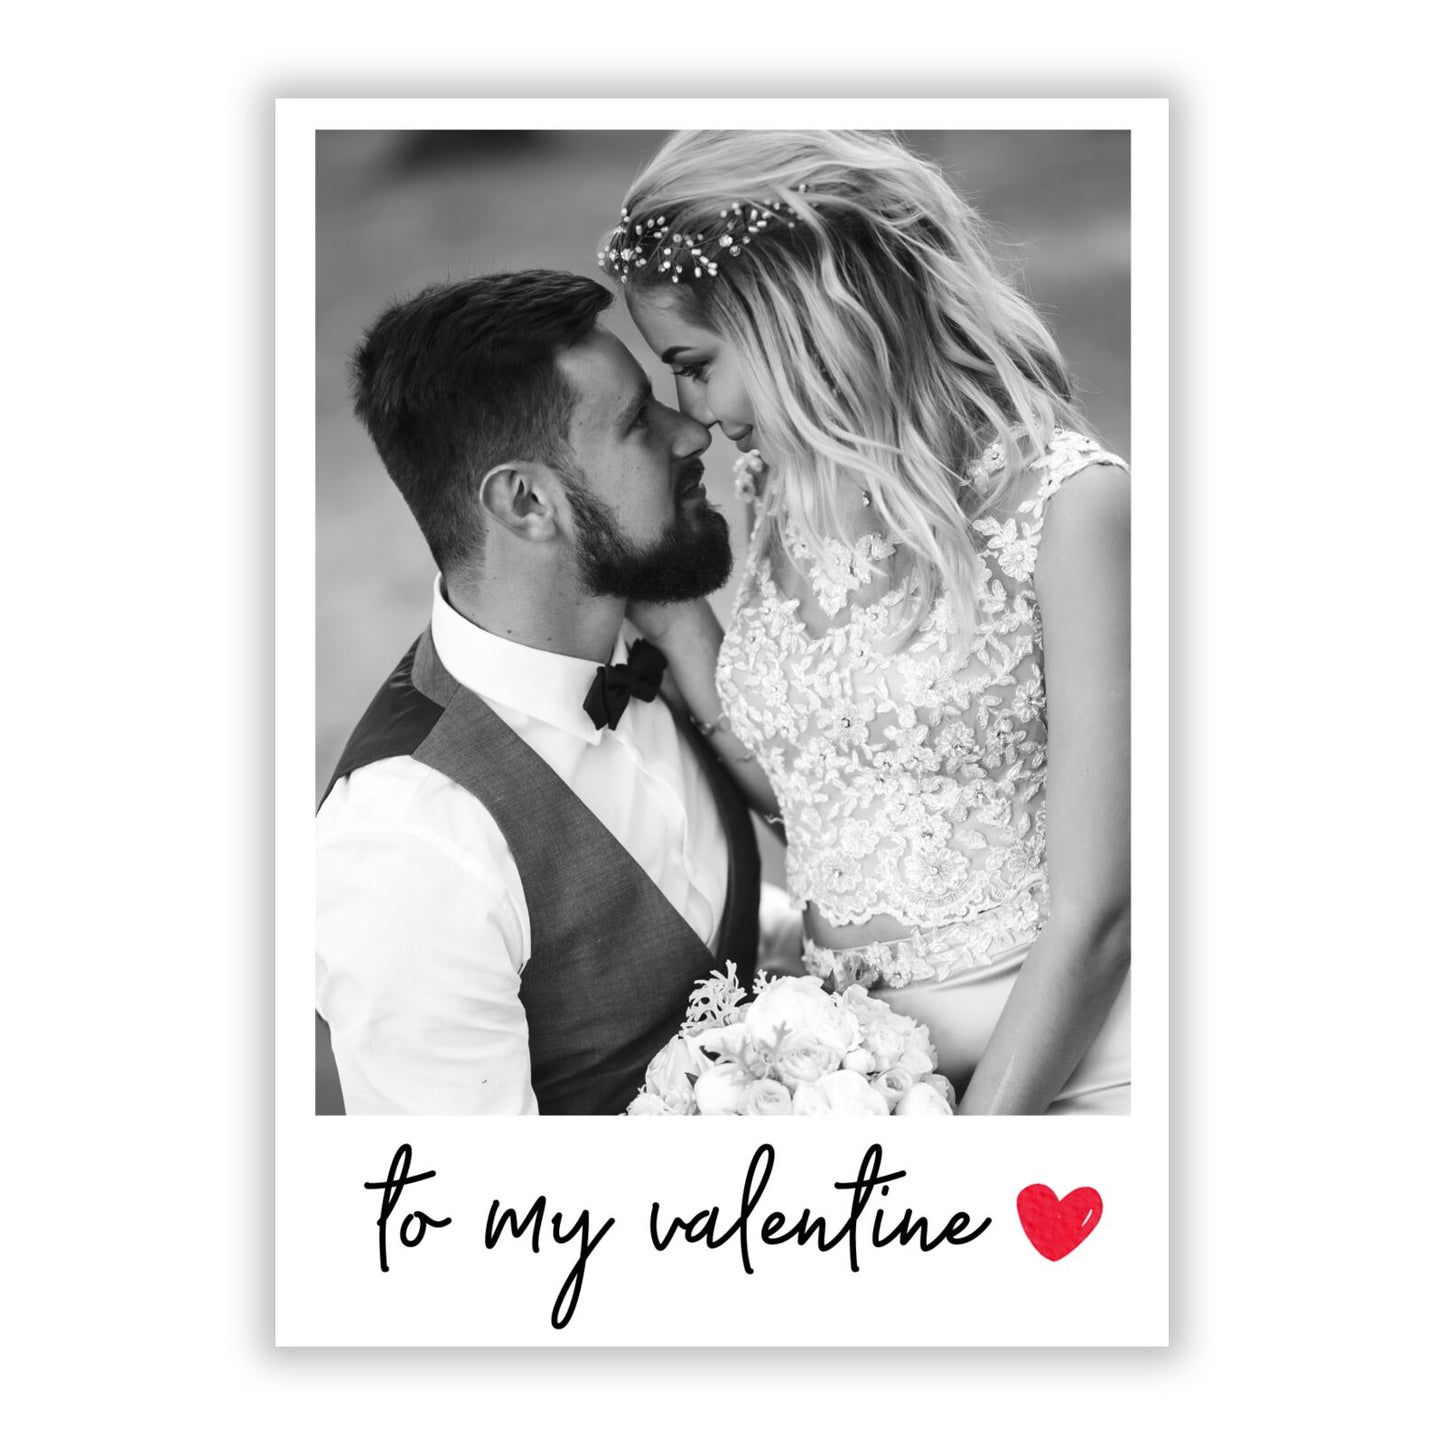 To my Valentine Photo A5 Flat Greetings Card